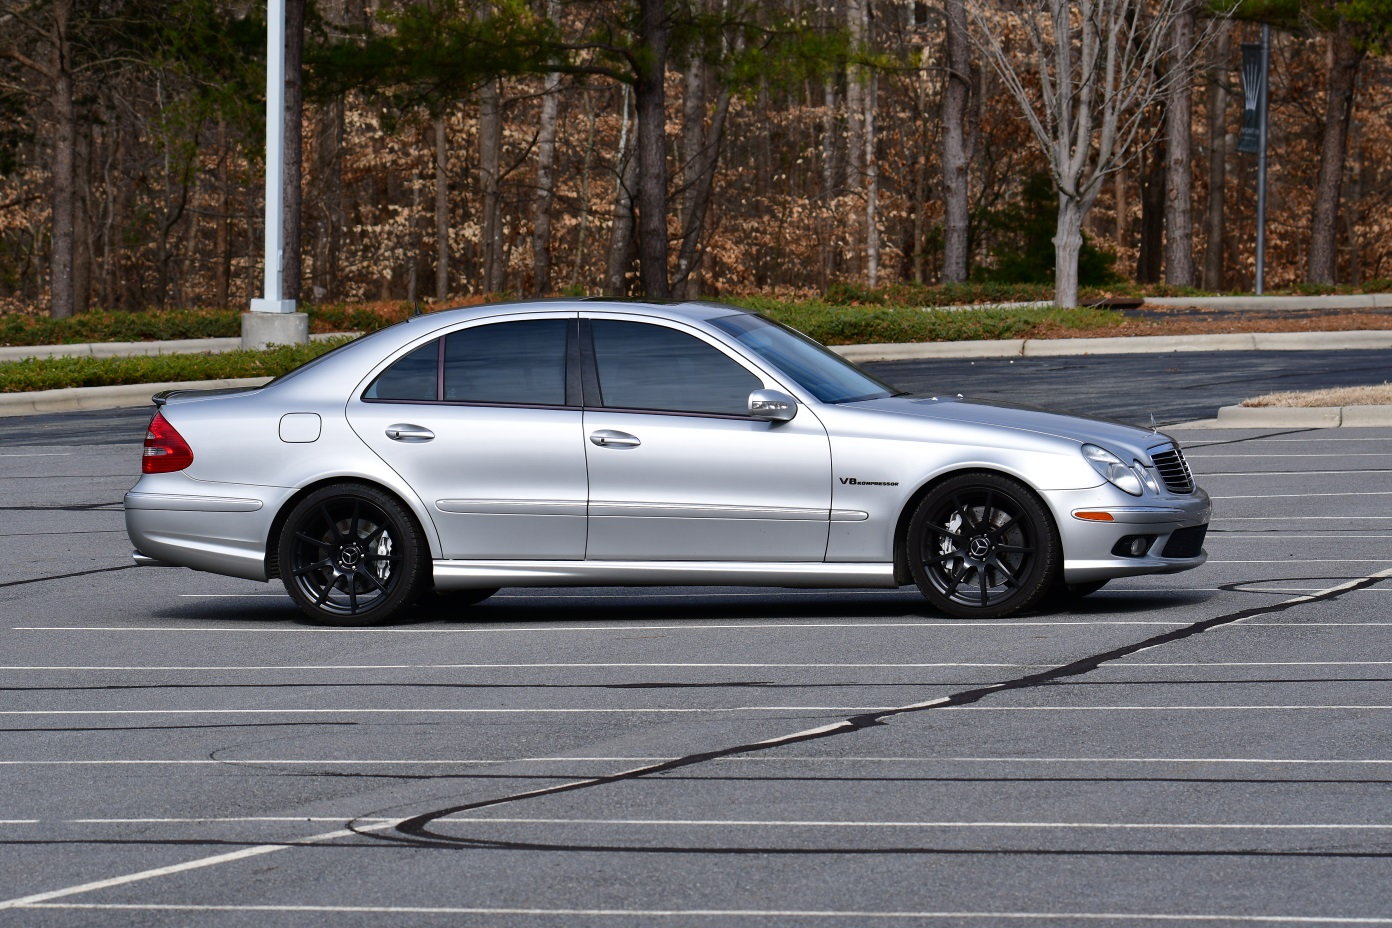 2004 Mercedes-Benz E55 AMG - 2004 AMG E55 - Adult Owned, Stock, Excellent Condition - Used - VIN WDBUF76J14A515080 - 95,000 Miles - 8 cyl - 2WD - Automatic - Sedan - Silver - Waxhaw, NC 28173, United States